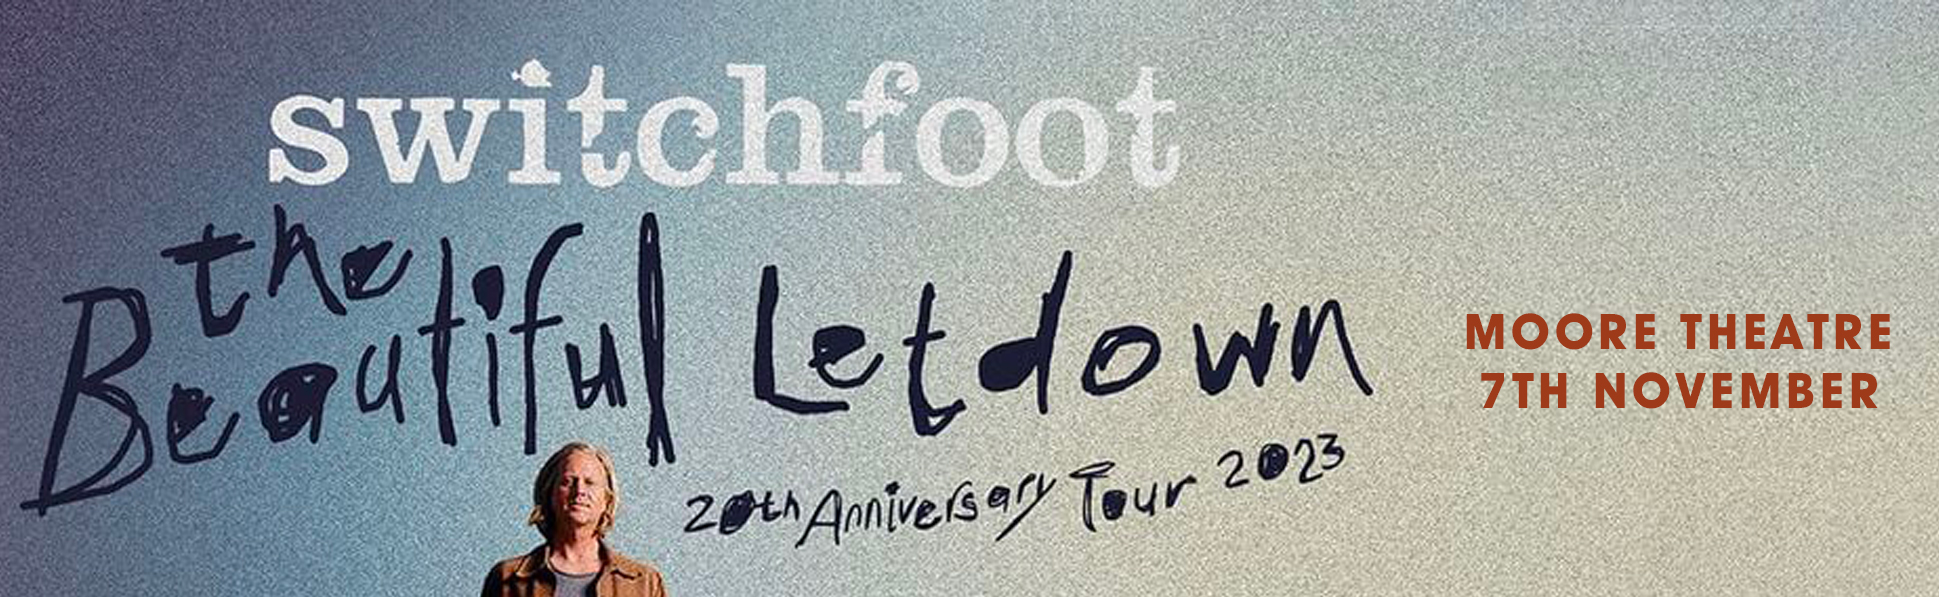 Switchfoot at Moore Theatre